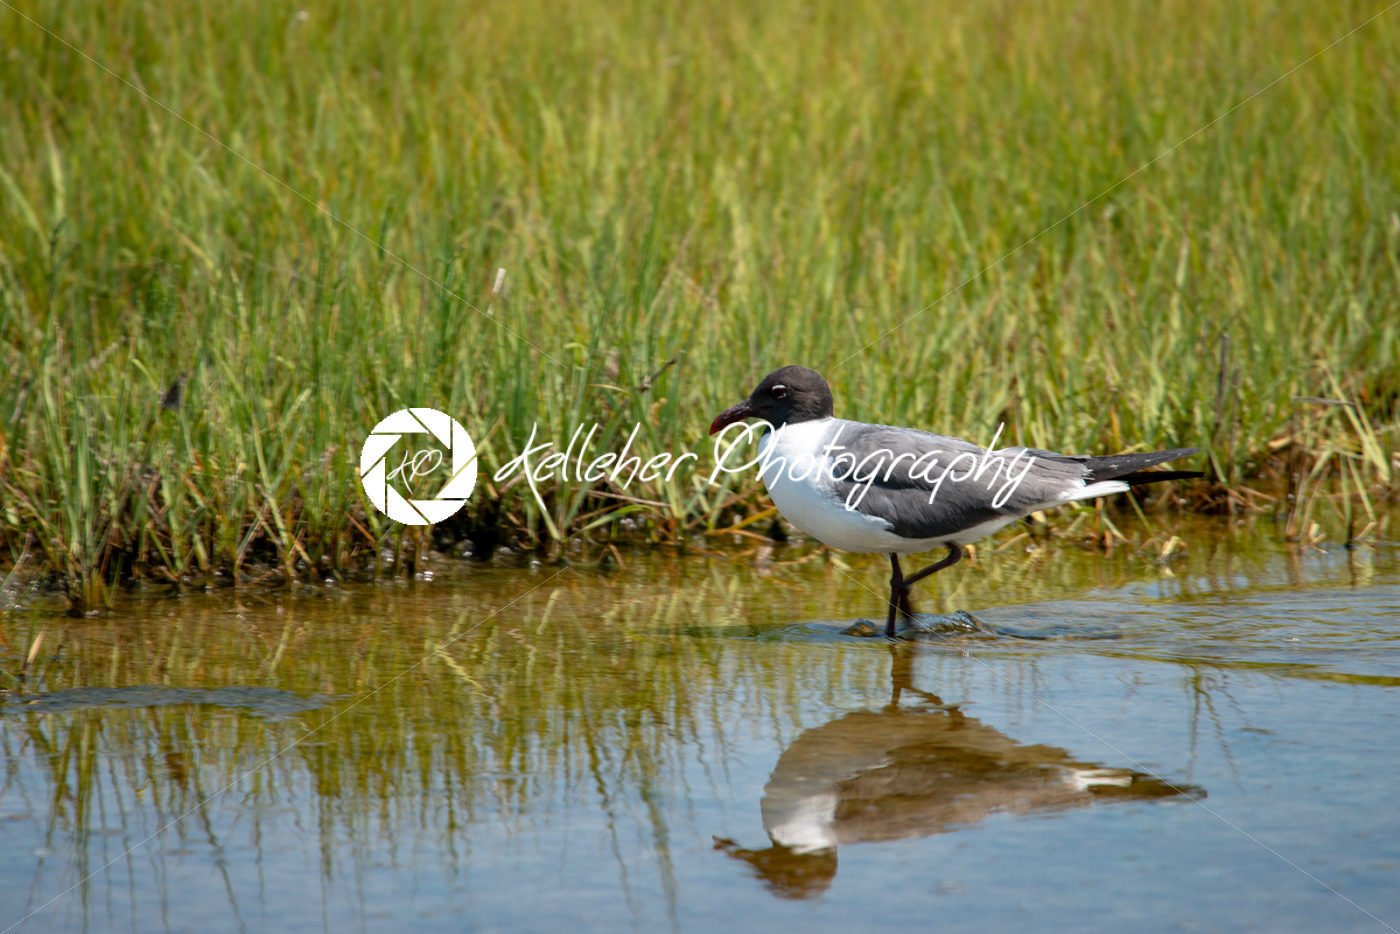 A shore bird, the Laughing Gull Leucophaeus atricilla has a call that sounds like laughter - Kelleher Photography Store